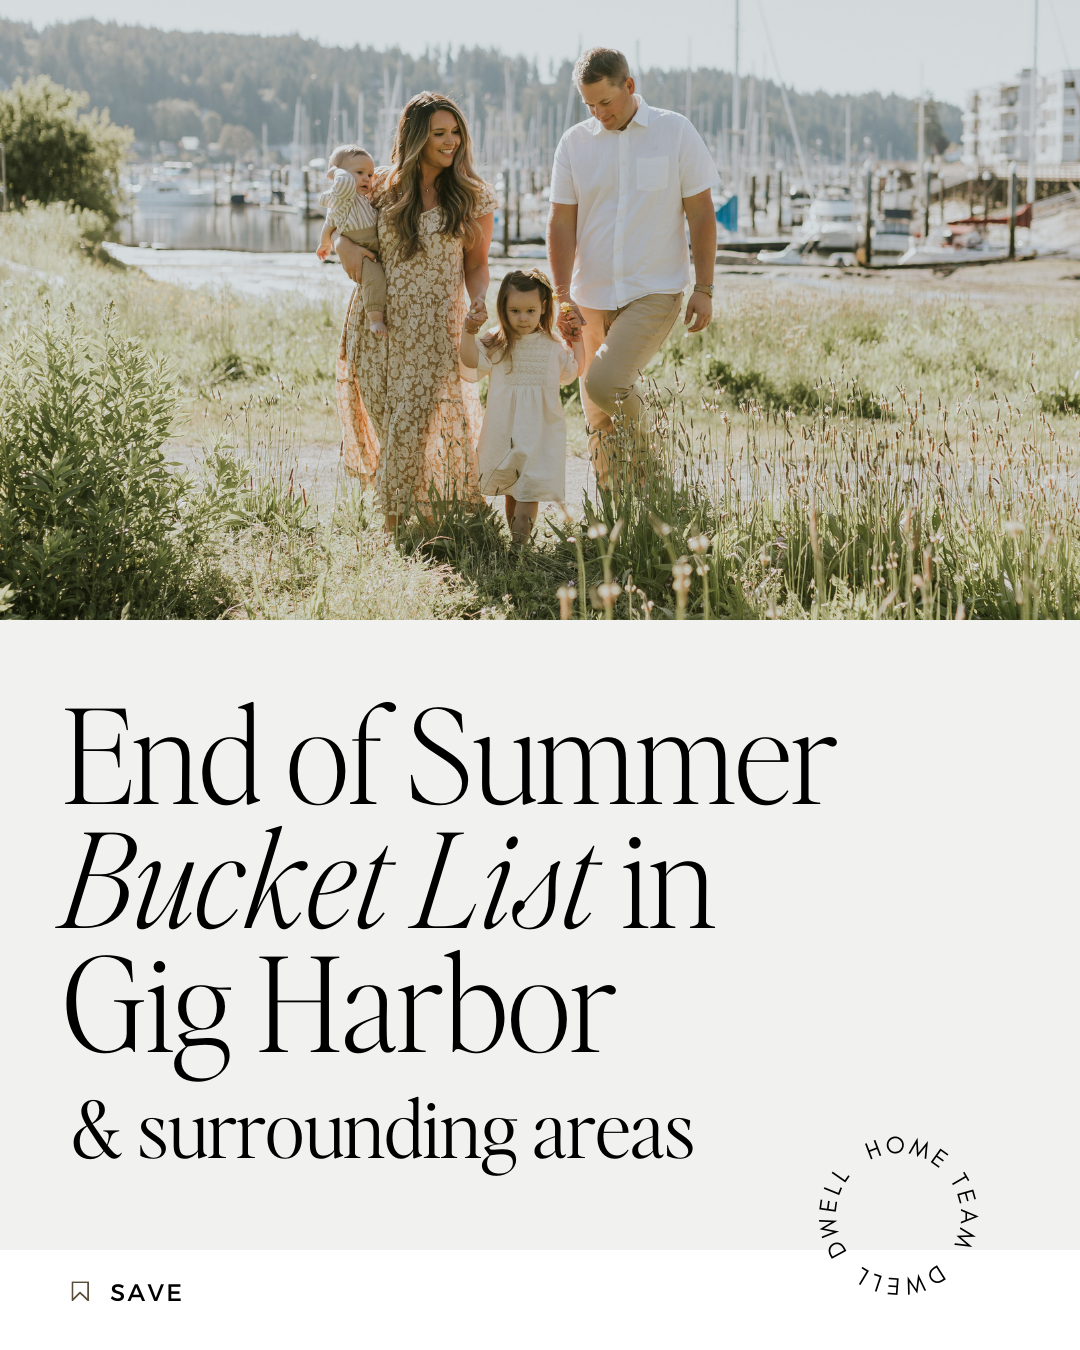 Things to do in Gig Harbor Washington - from dwell home team